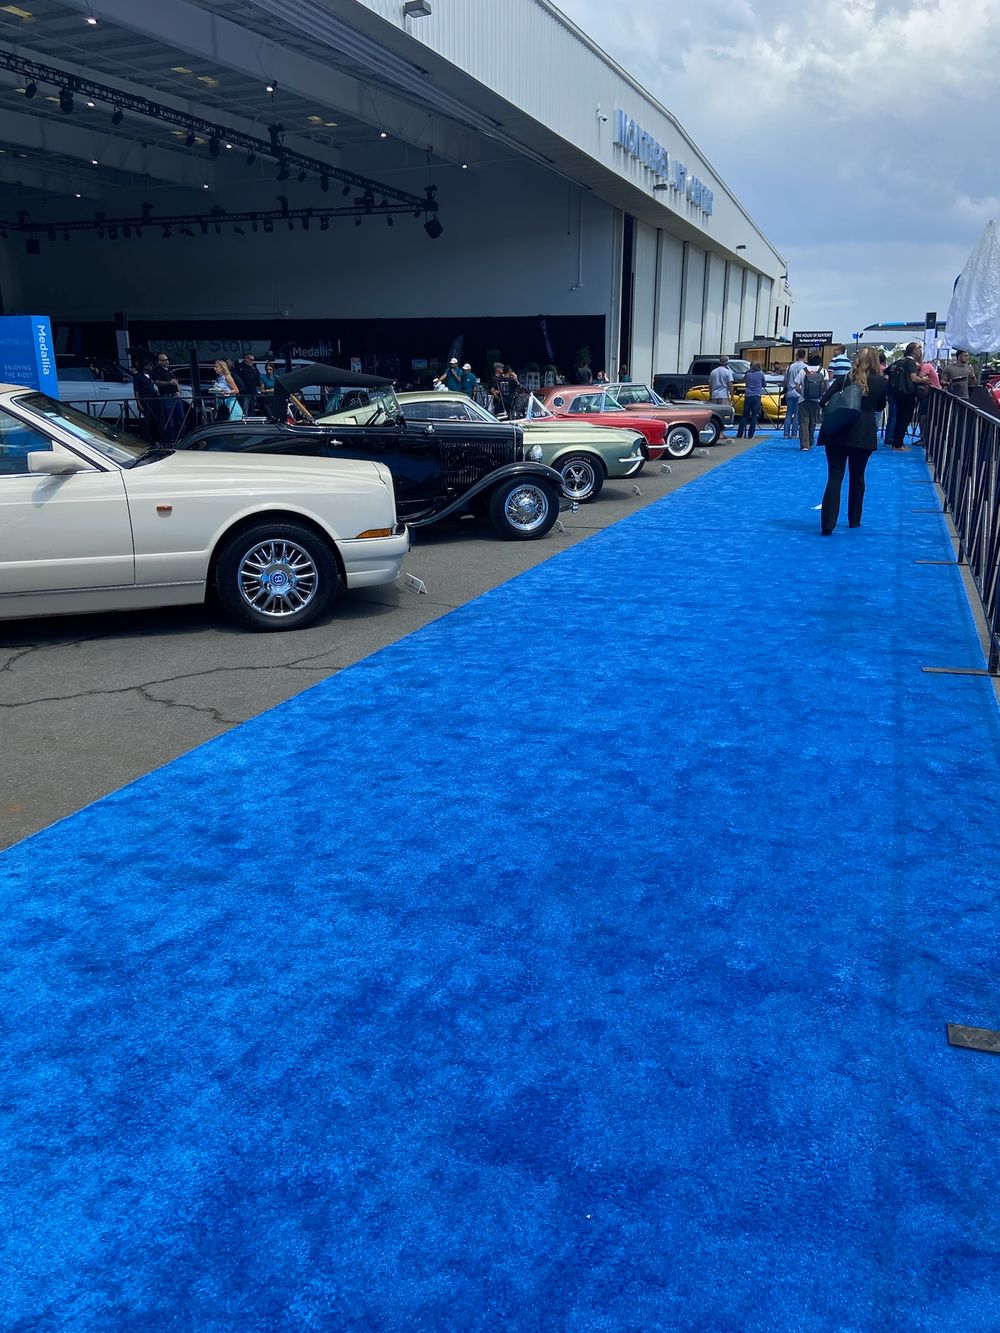 Broad Arrow Auctions Wows At Inaugural Monterey Jet Center Event